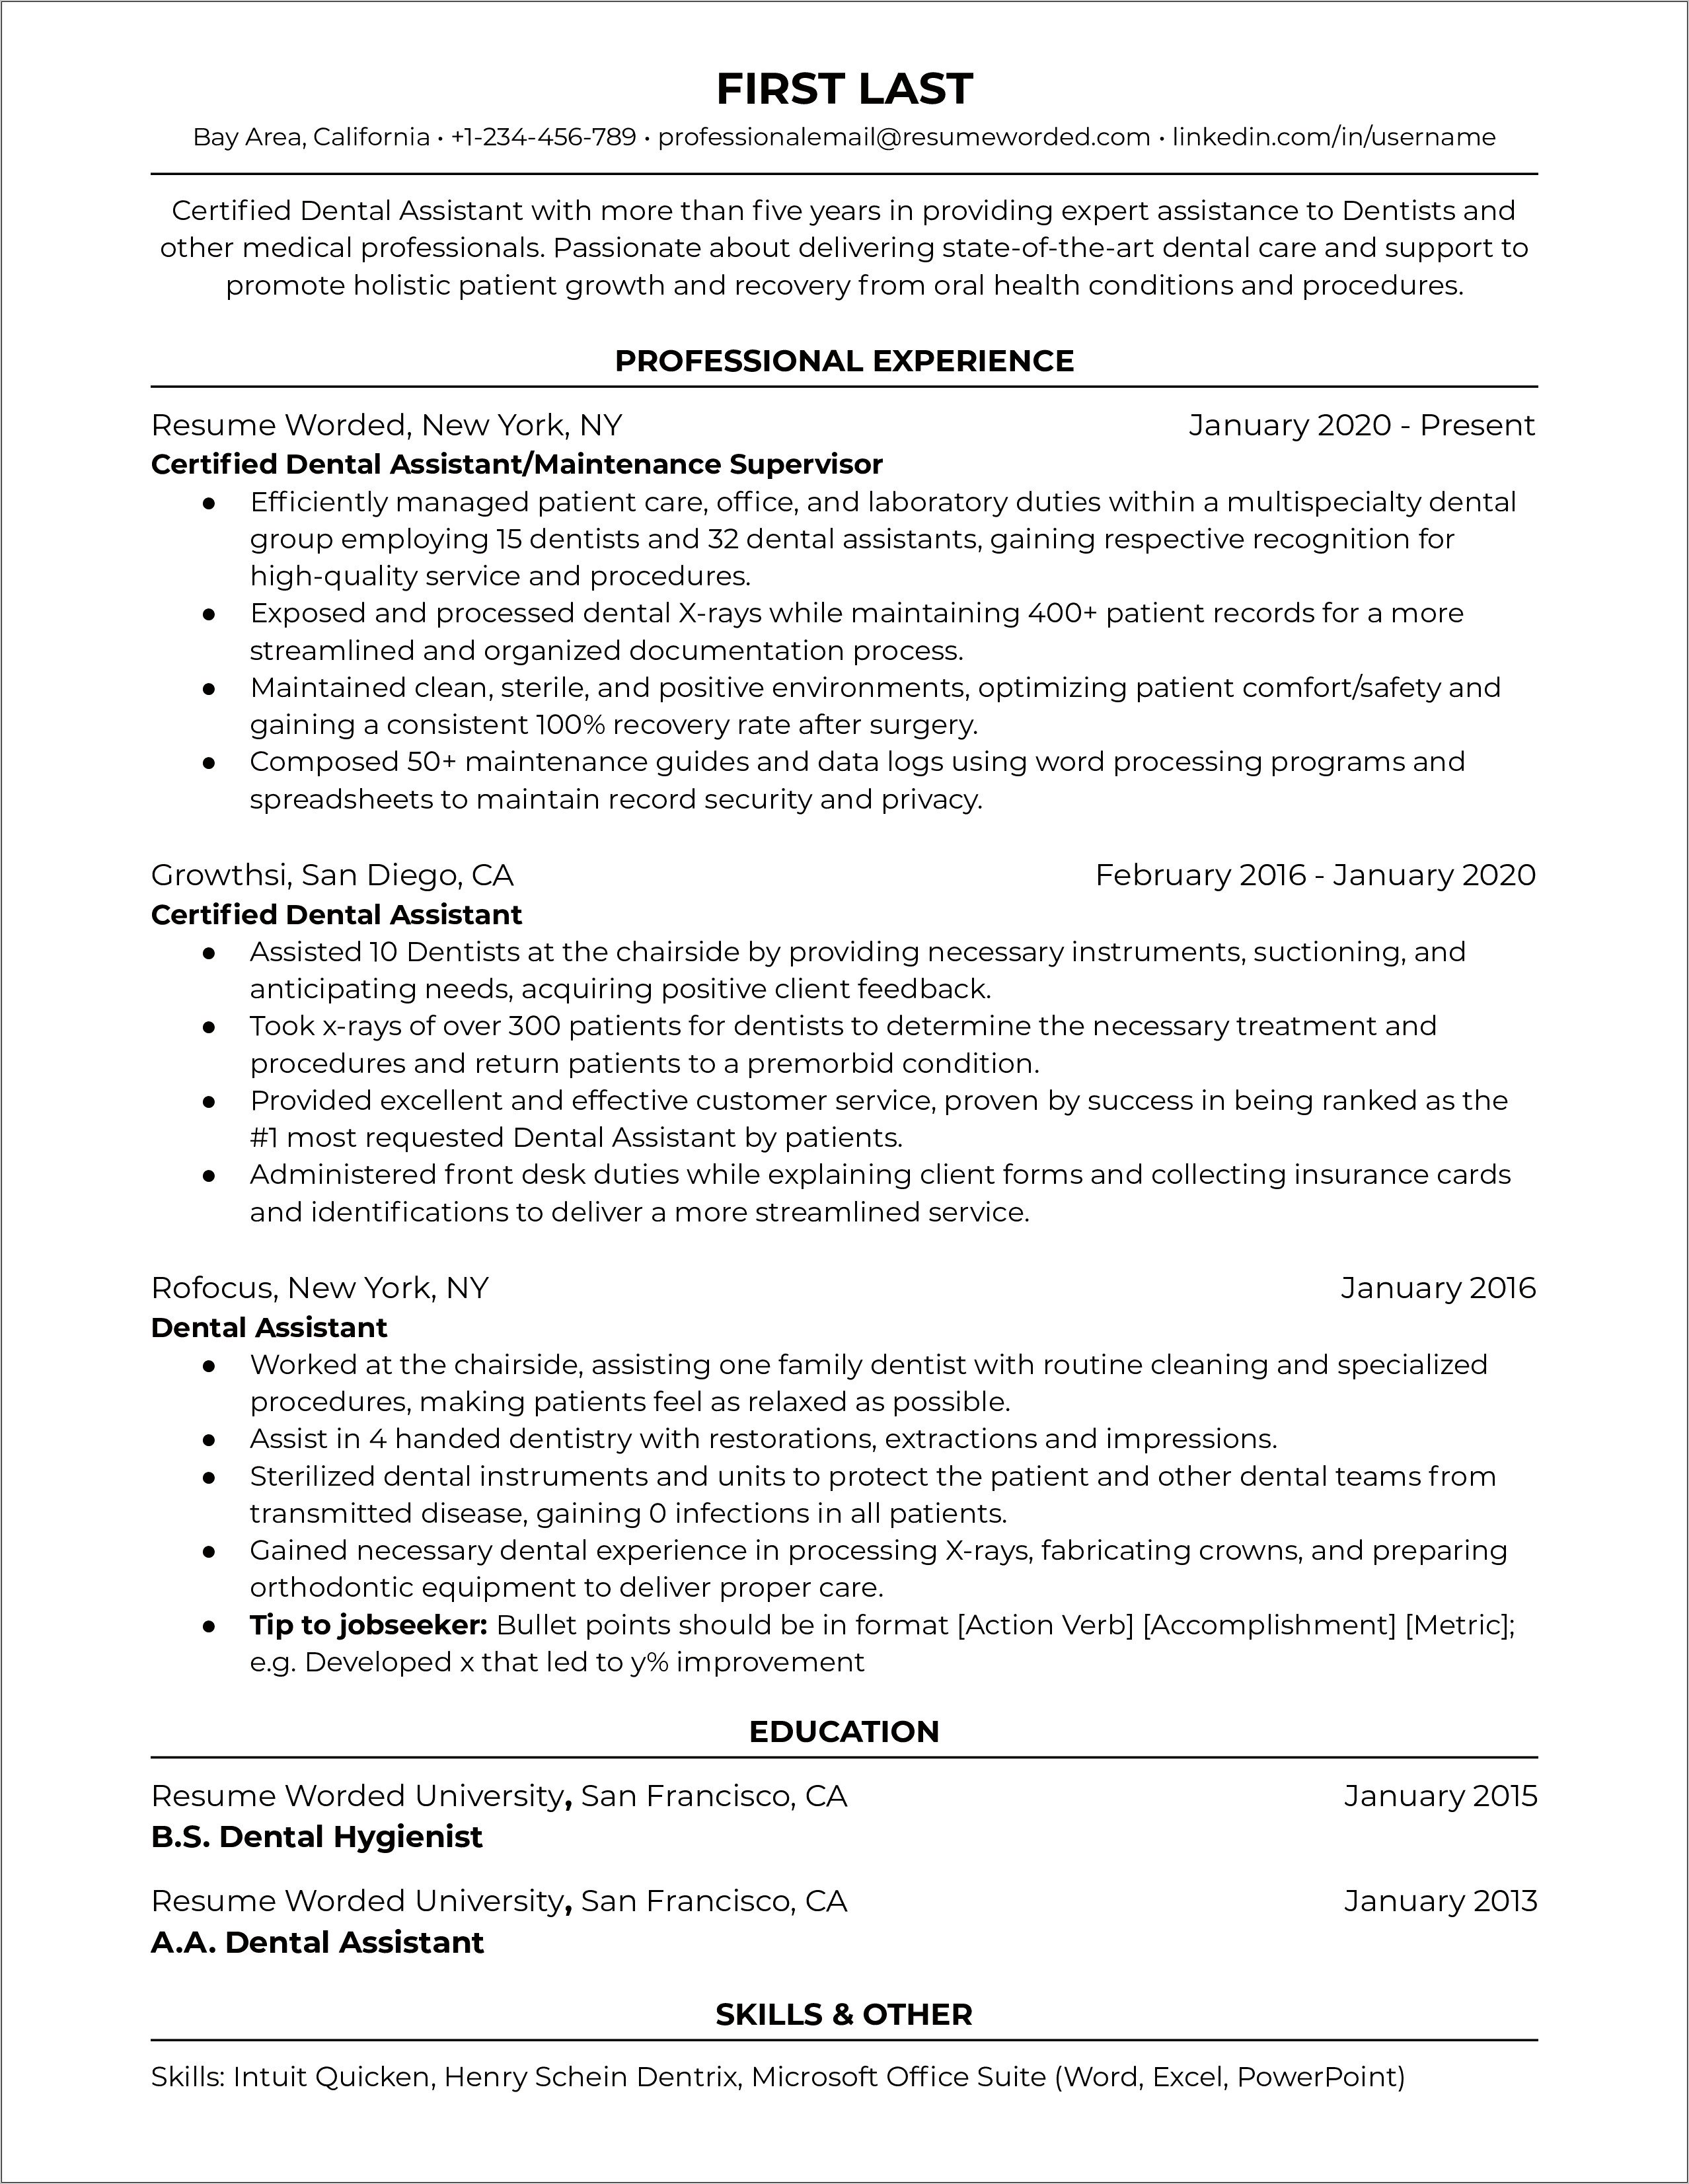 Resume Examples For Medical Professionals